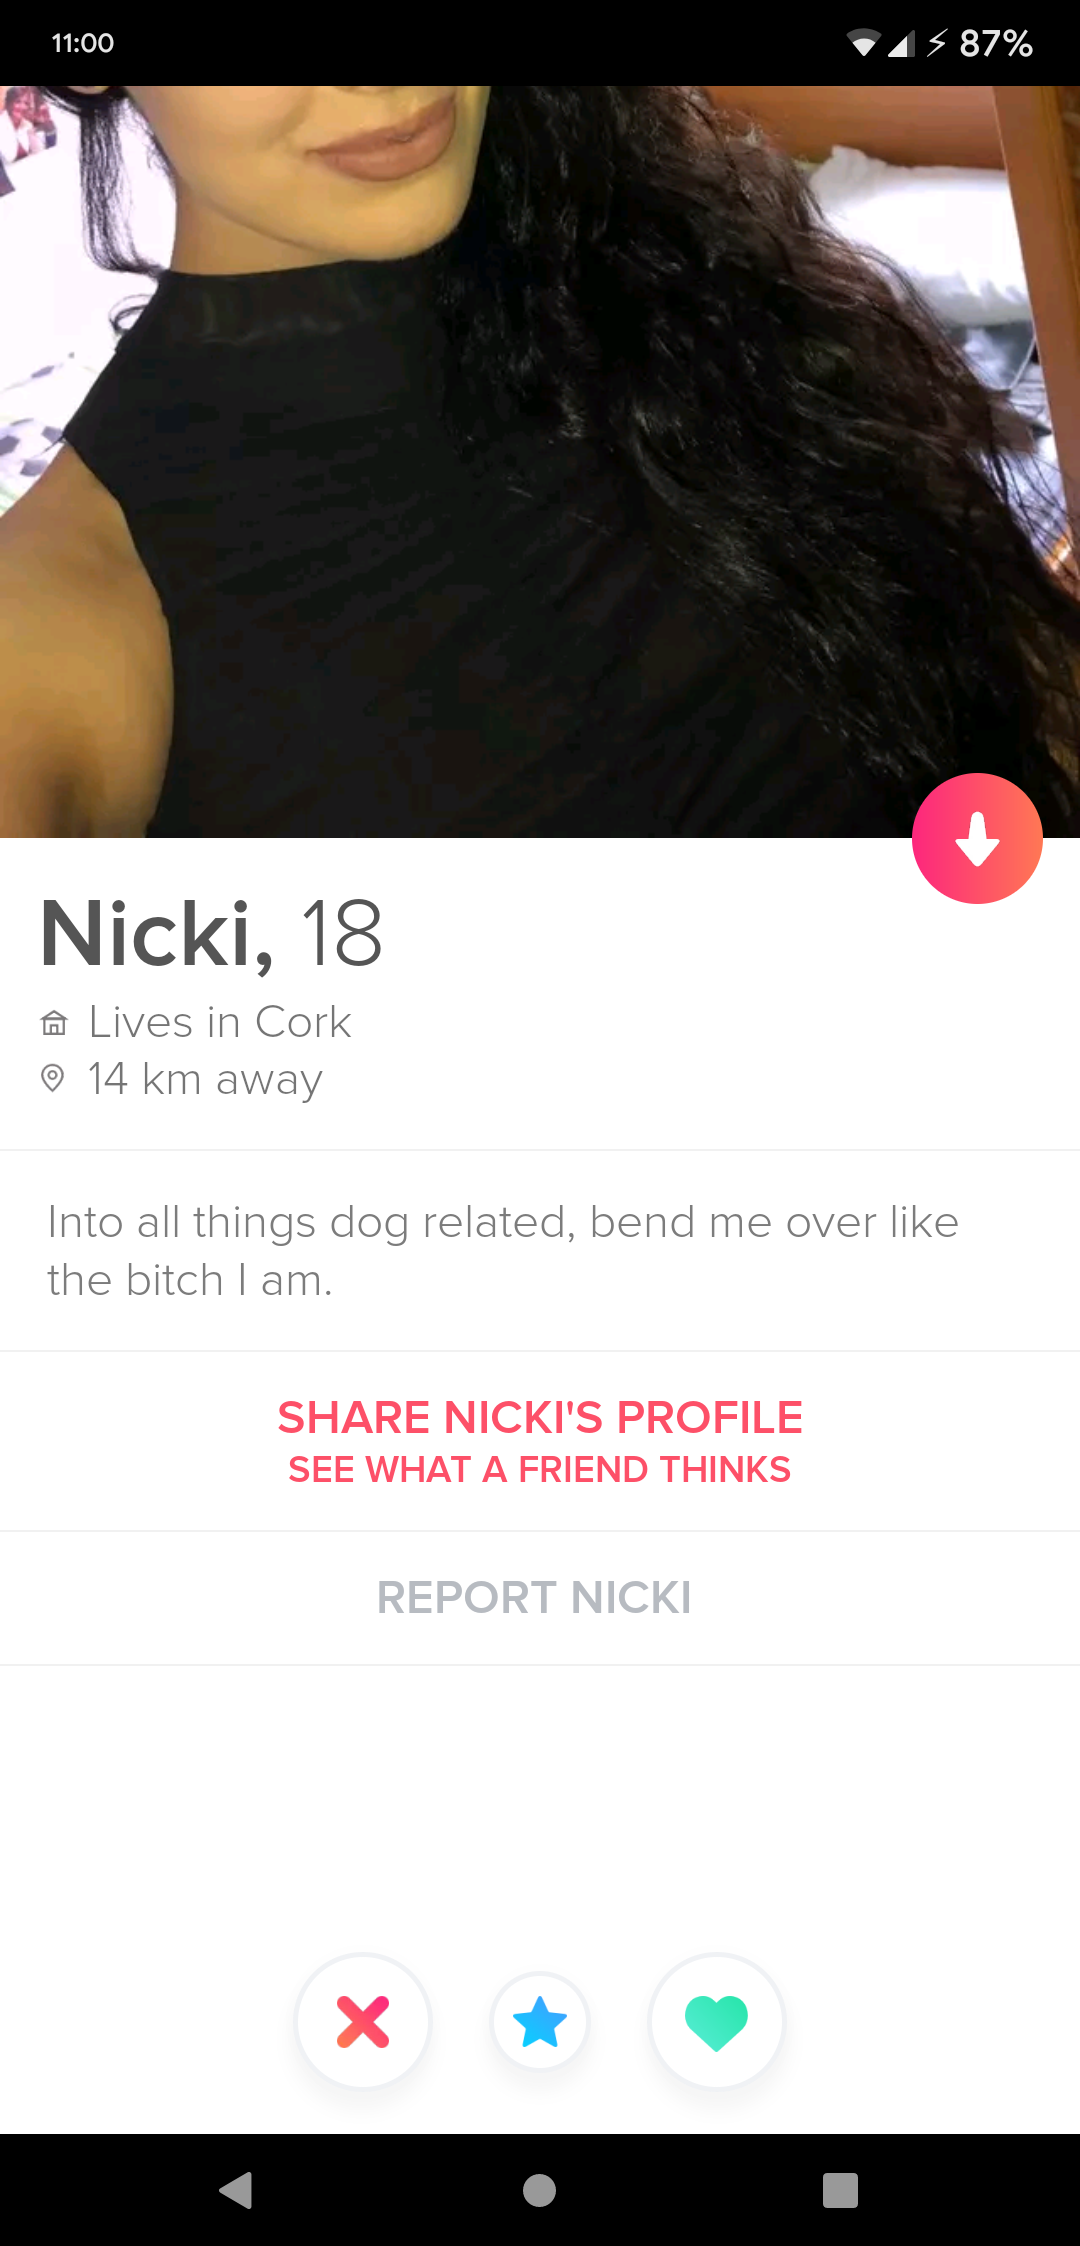 tinder wins and fails -Nicki, 18 Lives in Cork 14 km away Into all things dog related, bend me over the bitch I am